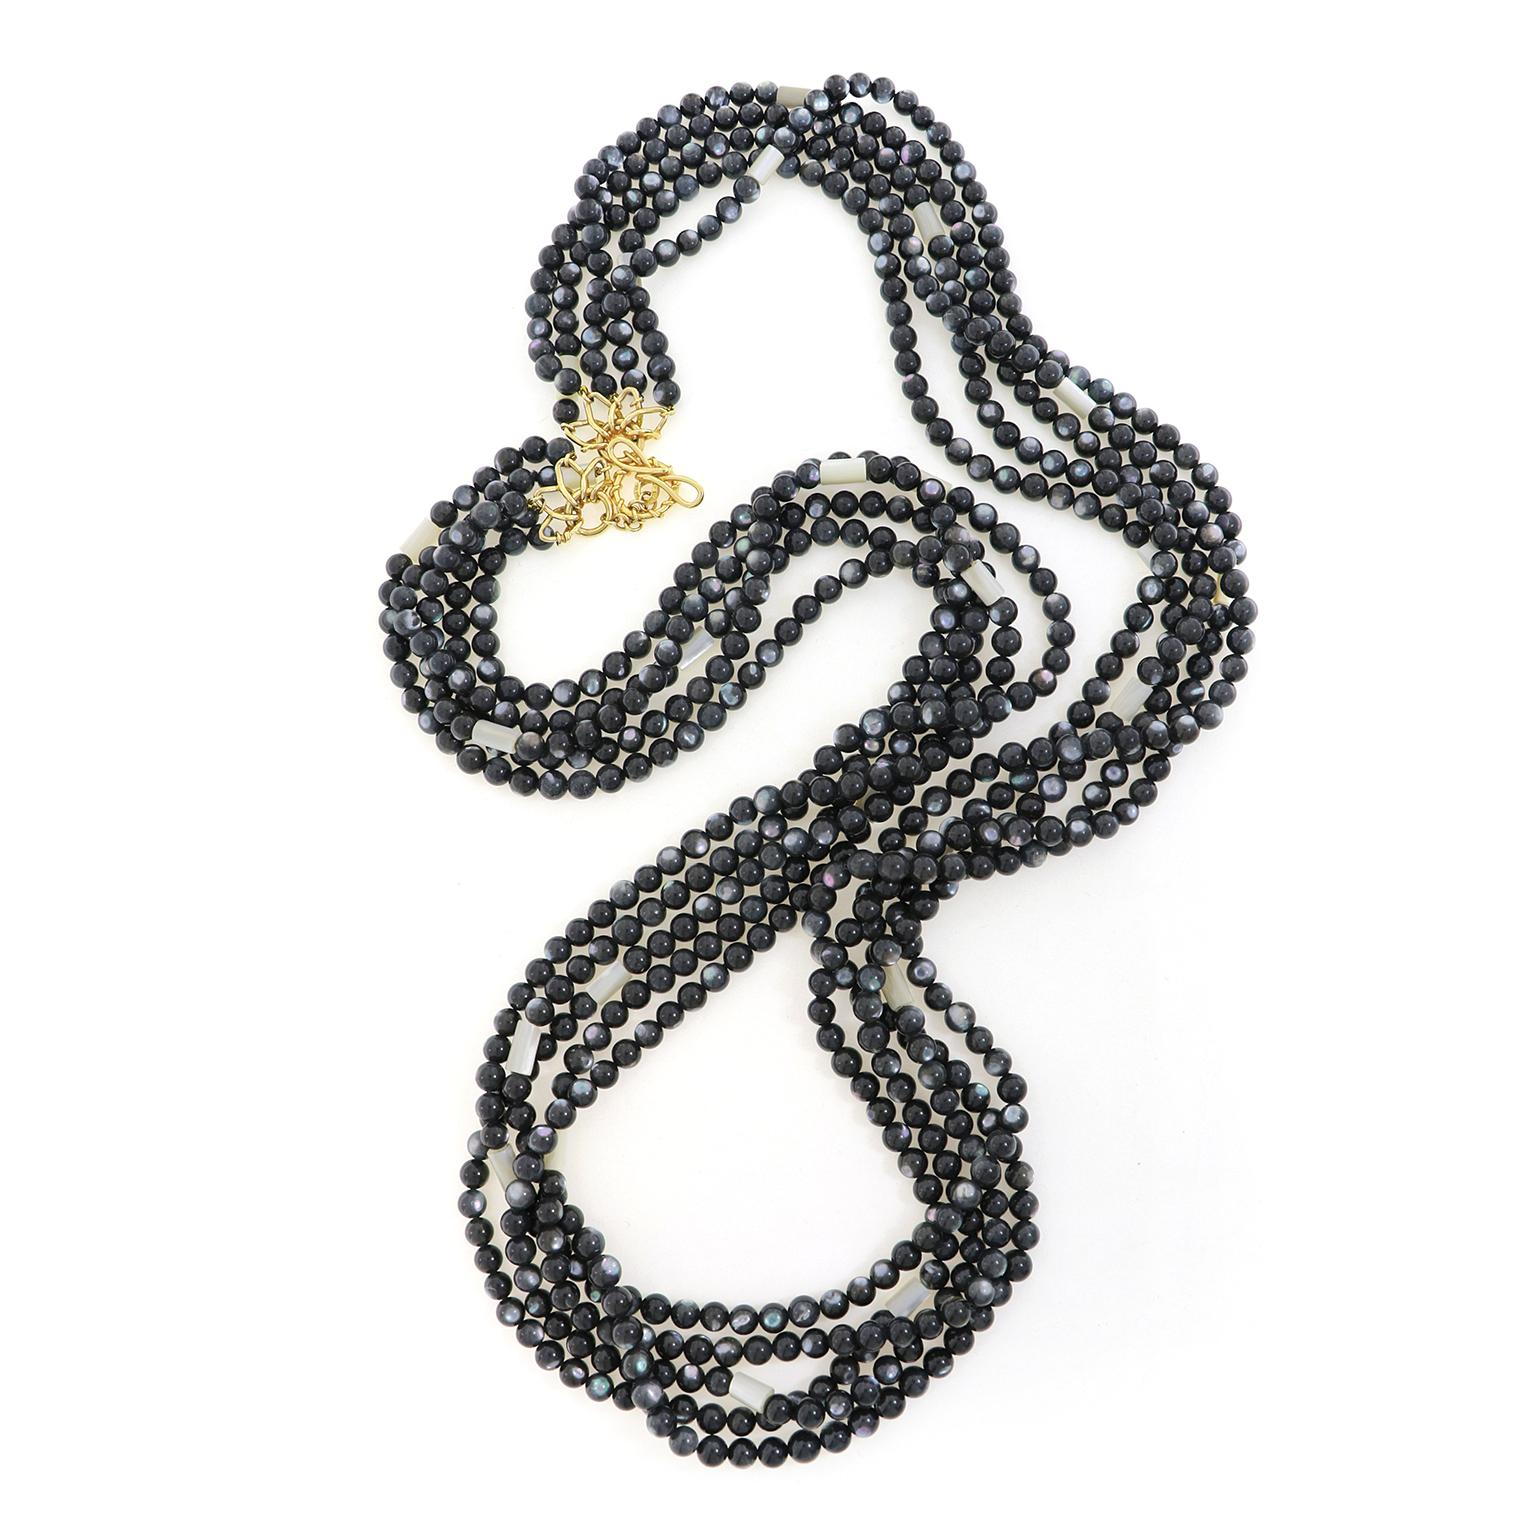 Beads of black mother of pearl glimmer varied colors in this five strand necklace, accented by white mother of pearl and secured by 18k yellow gold. Round beads of black mother of pearl are strung on coordinating thread, while narrow tubes of mother